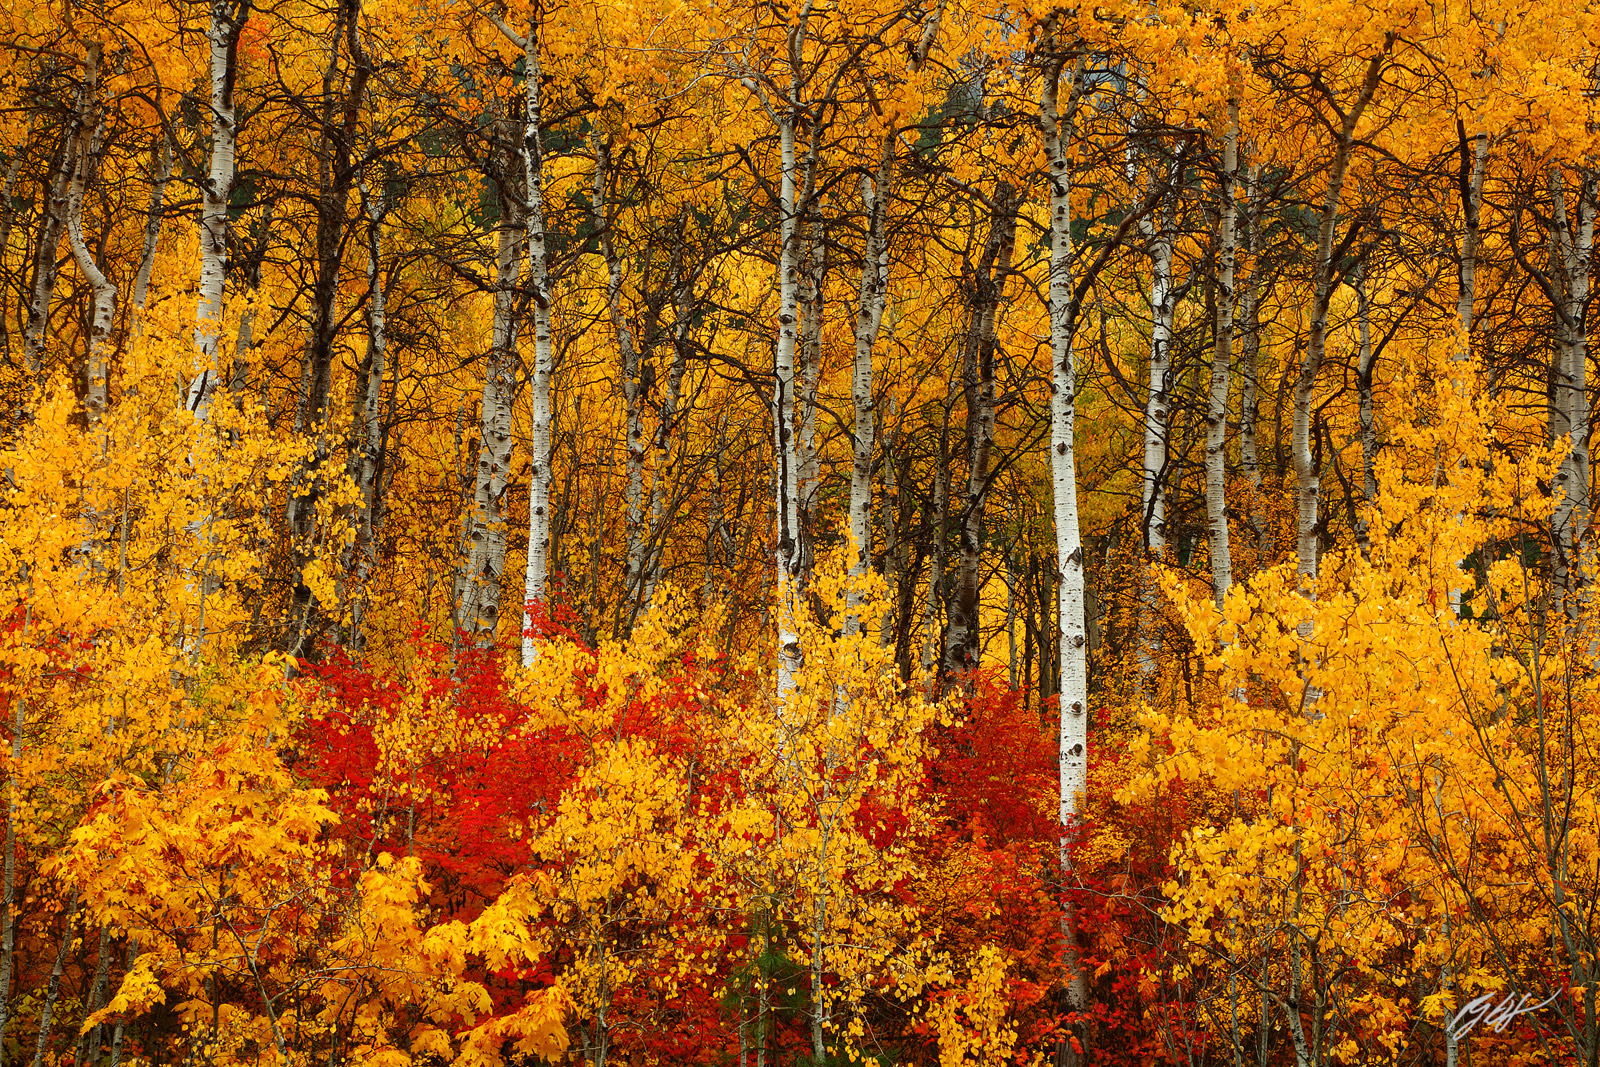 Fall Color and Aspens in the Wenatchee National Forest in Washington